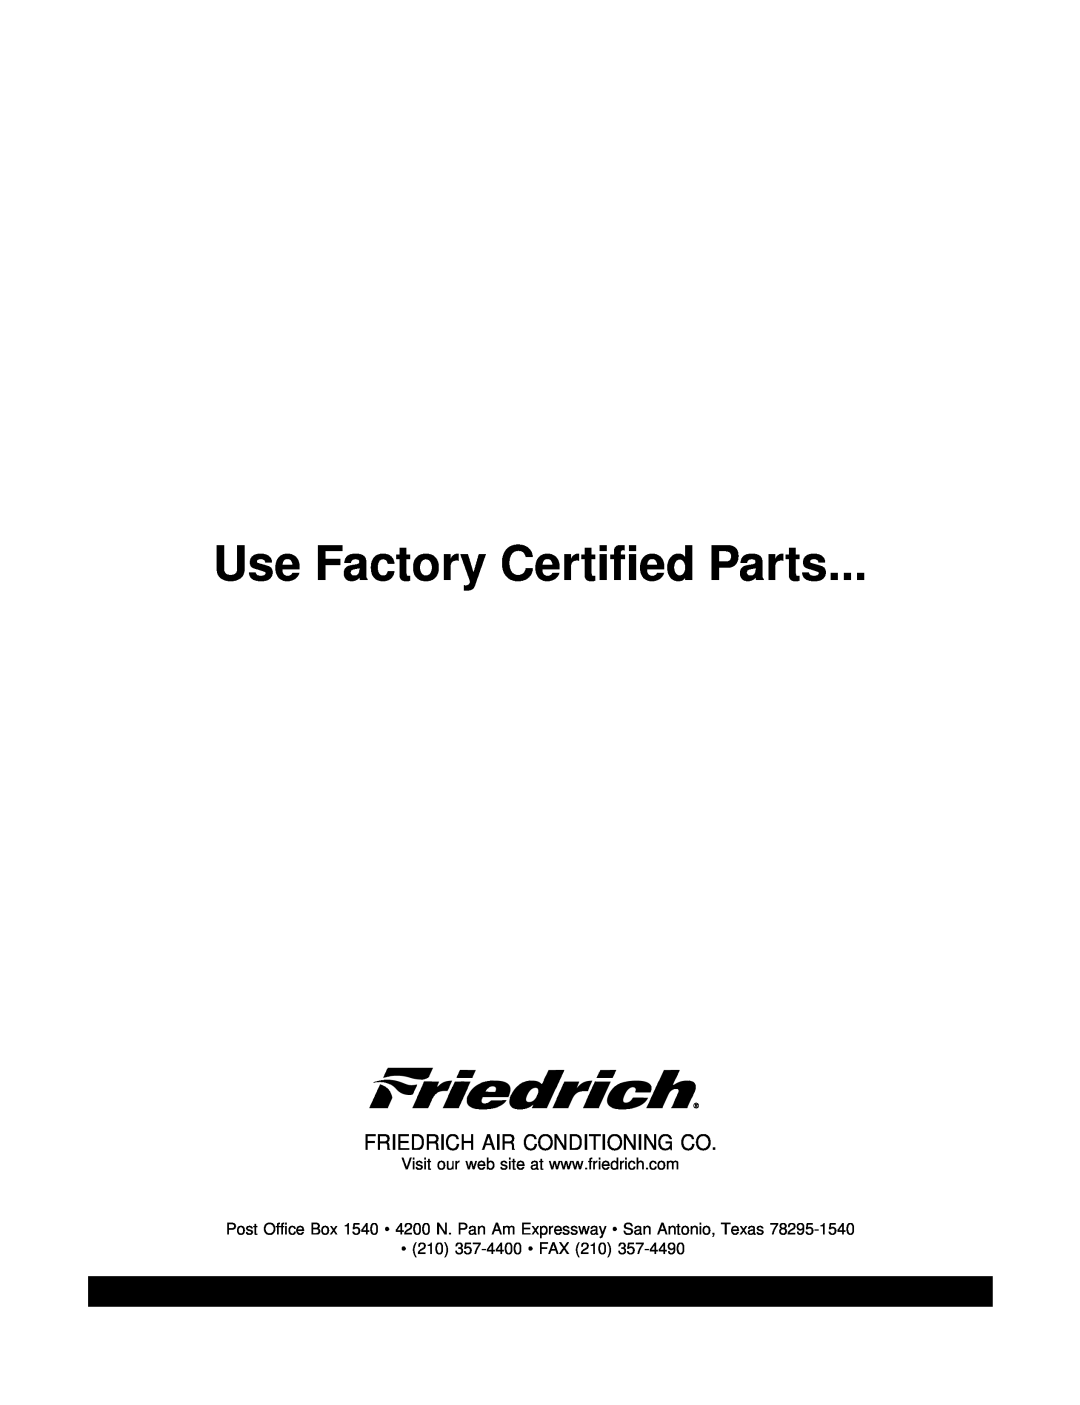 Friedrich CP05A10, CP06A10 manual Use Factory Certified Parts, Friedrich Air Conditioning Co, 210 357-4400 FAX 